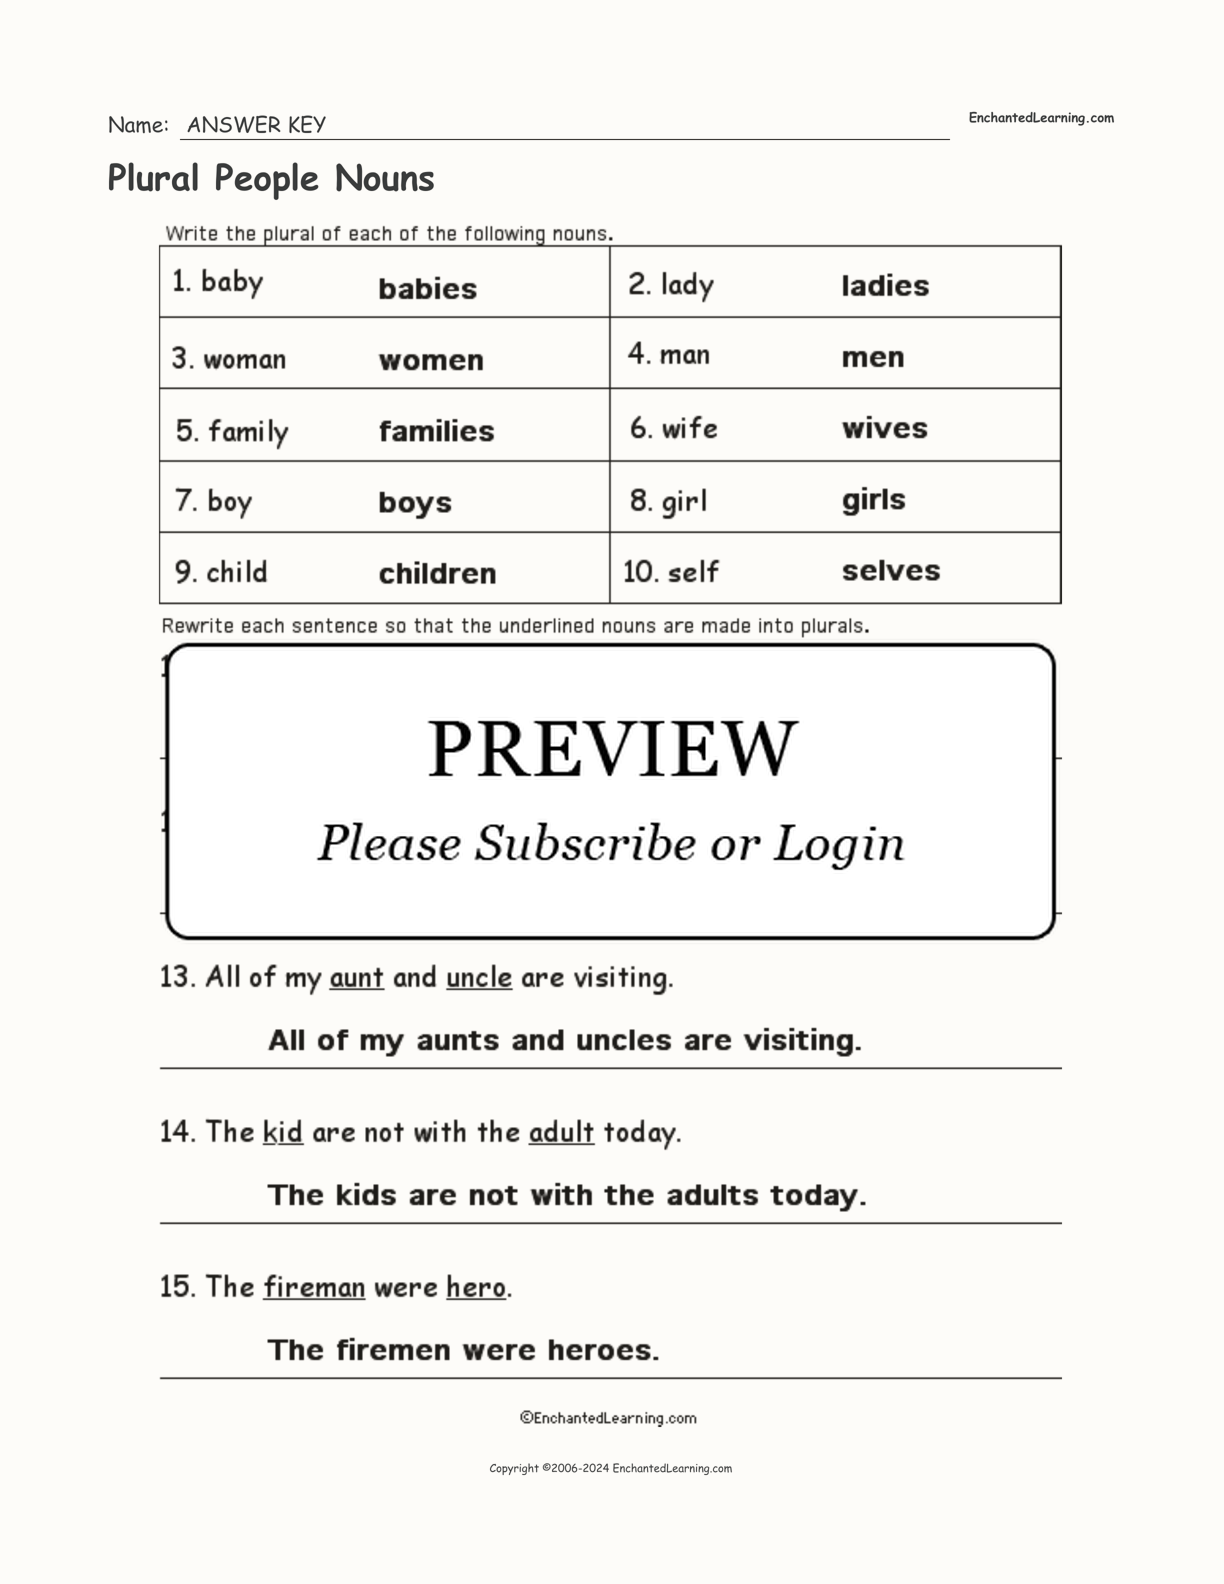 Plural People Nouns interactive worksheet page 2